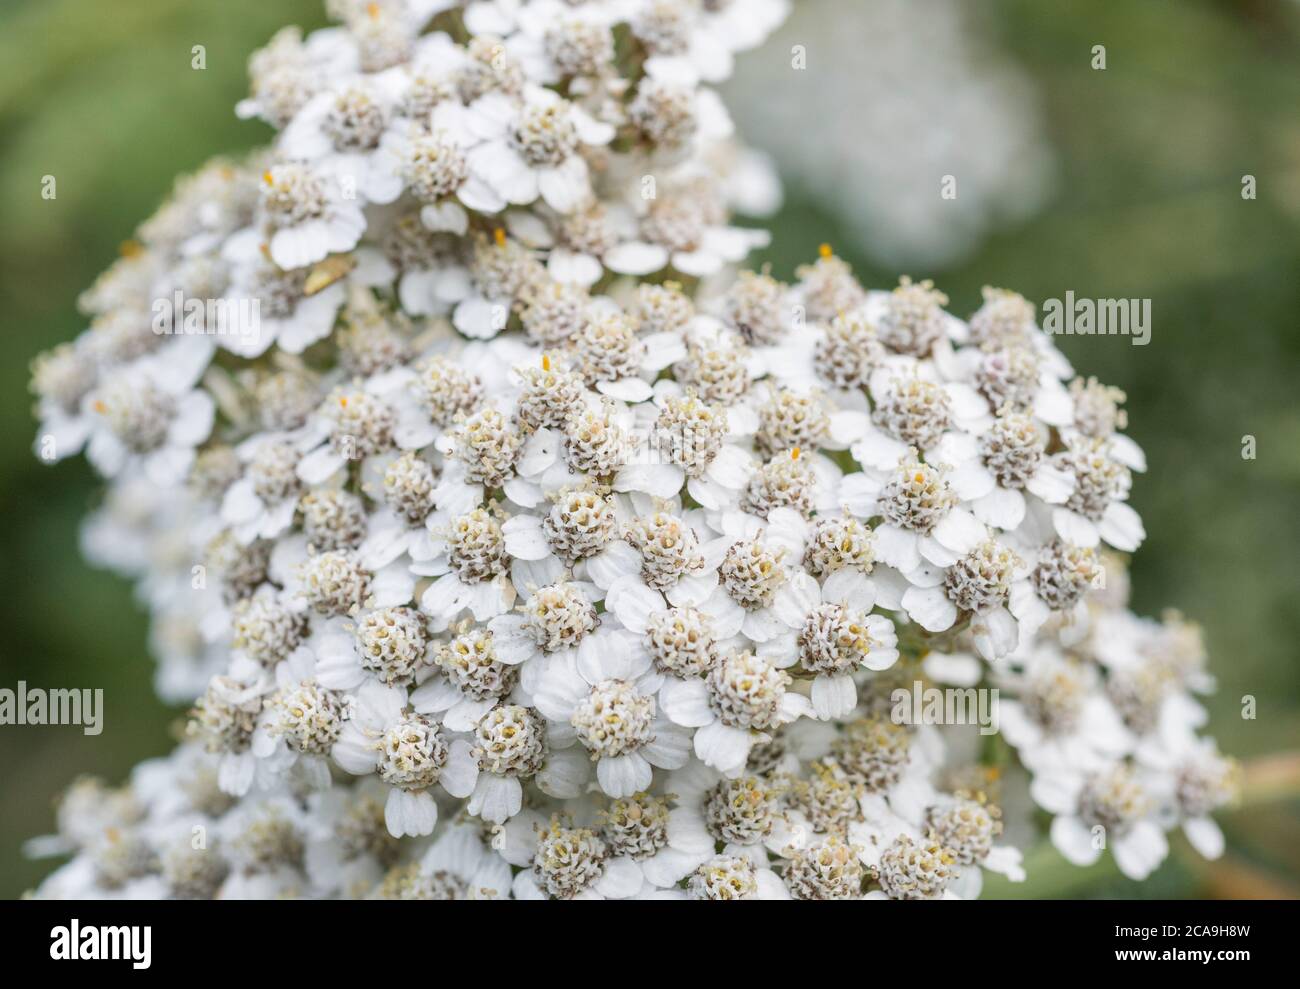 Yarrow / Achillea millefolium top with fully developed flowers (July). Also called Milfoil, the plant was used as a medicinal plant in herbal remedies Stock Photo